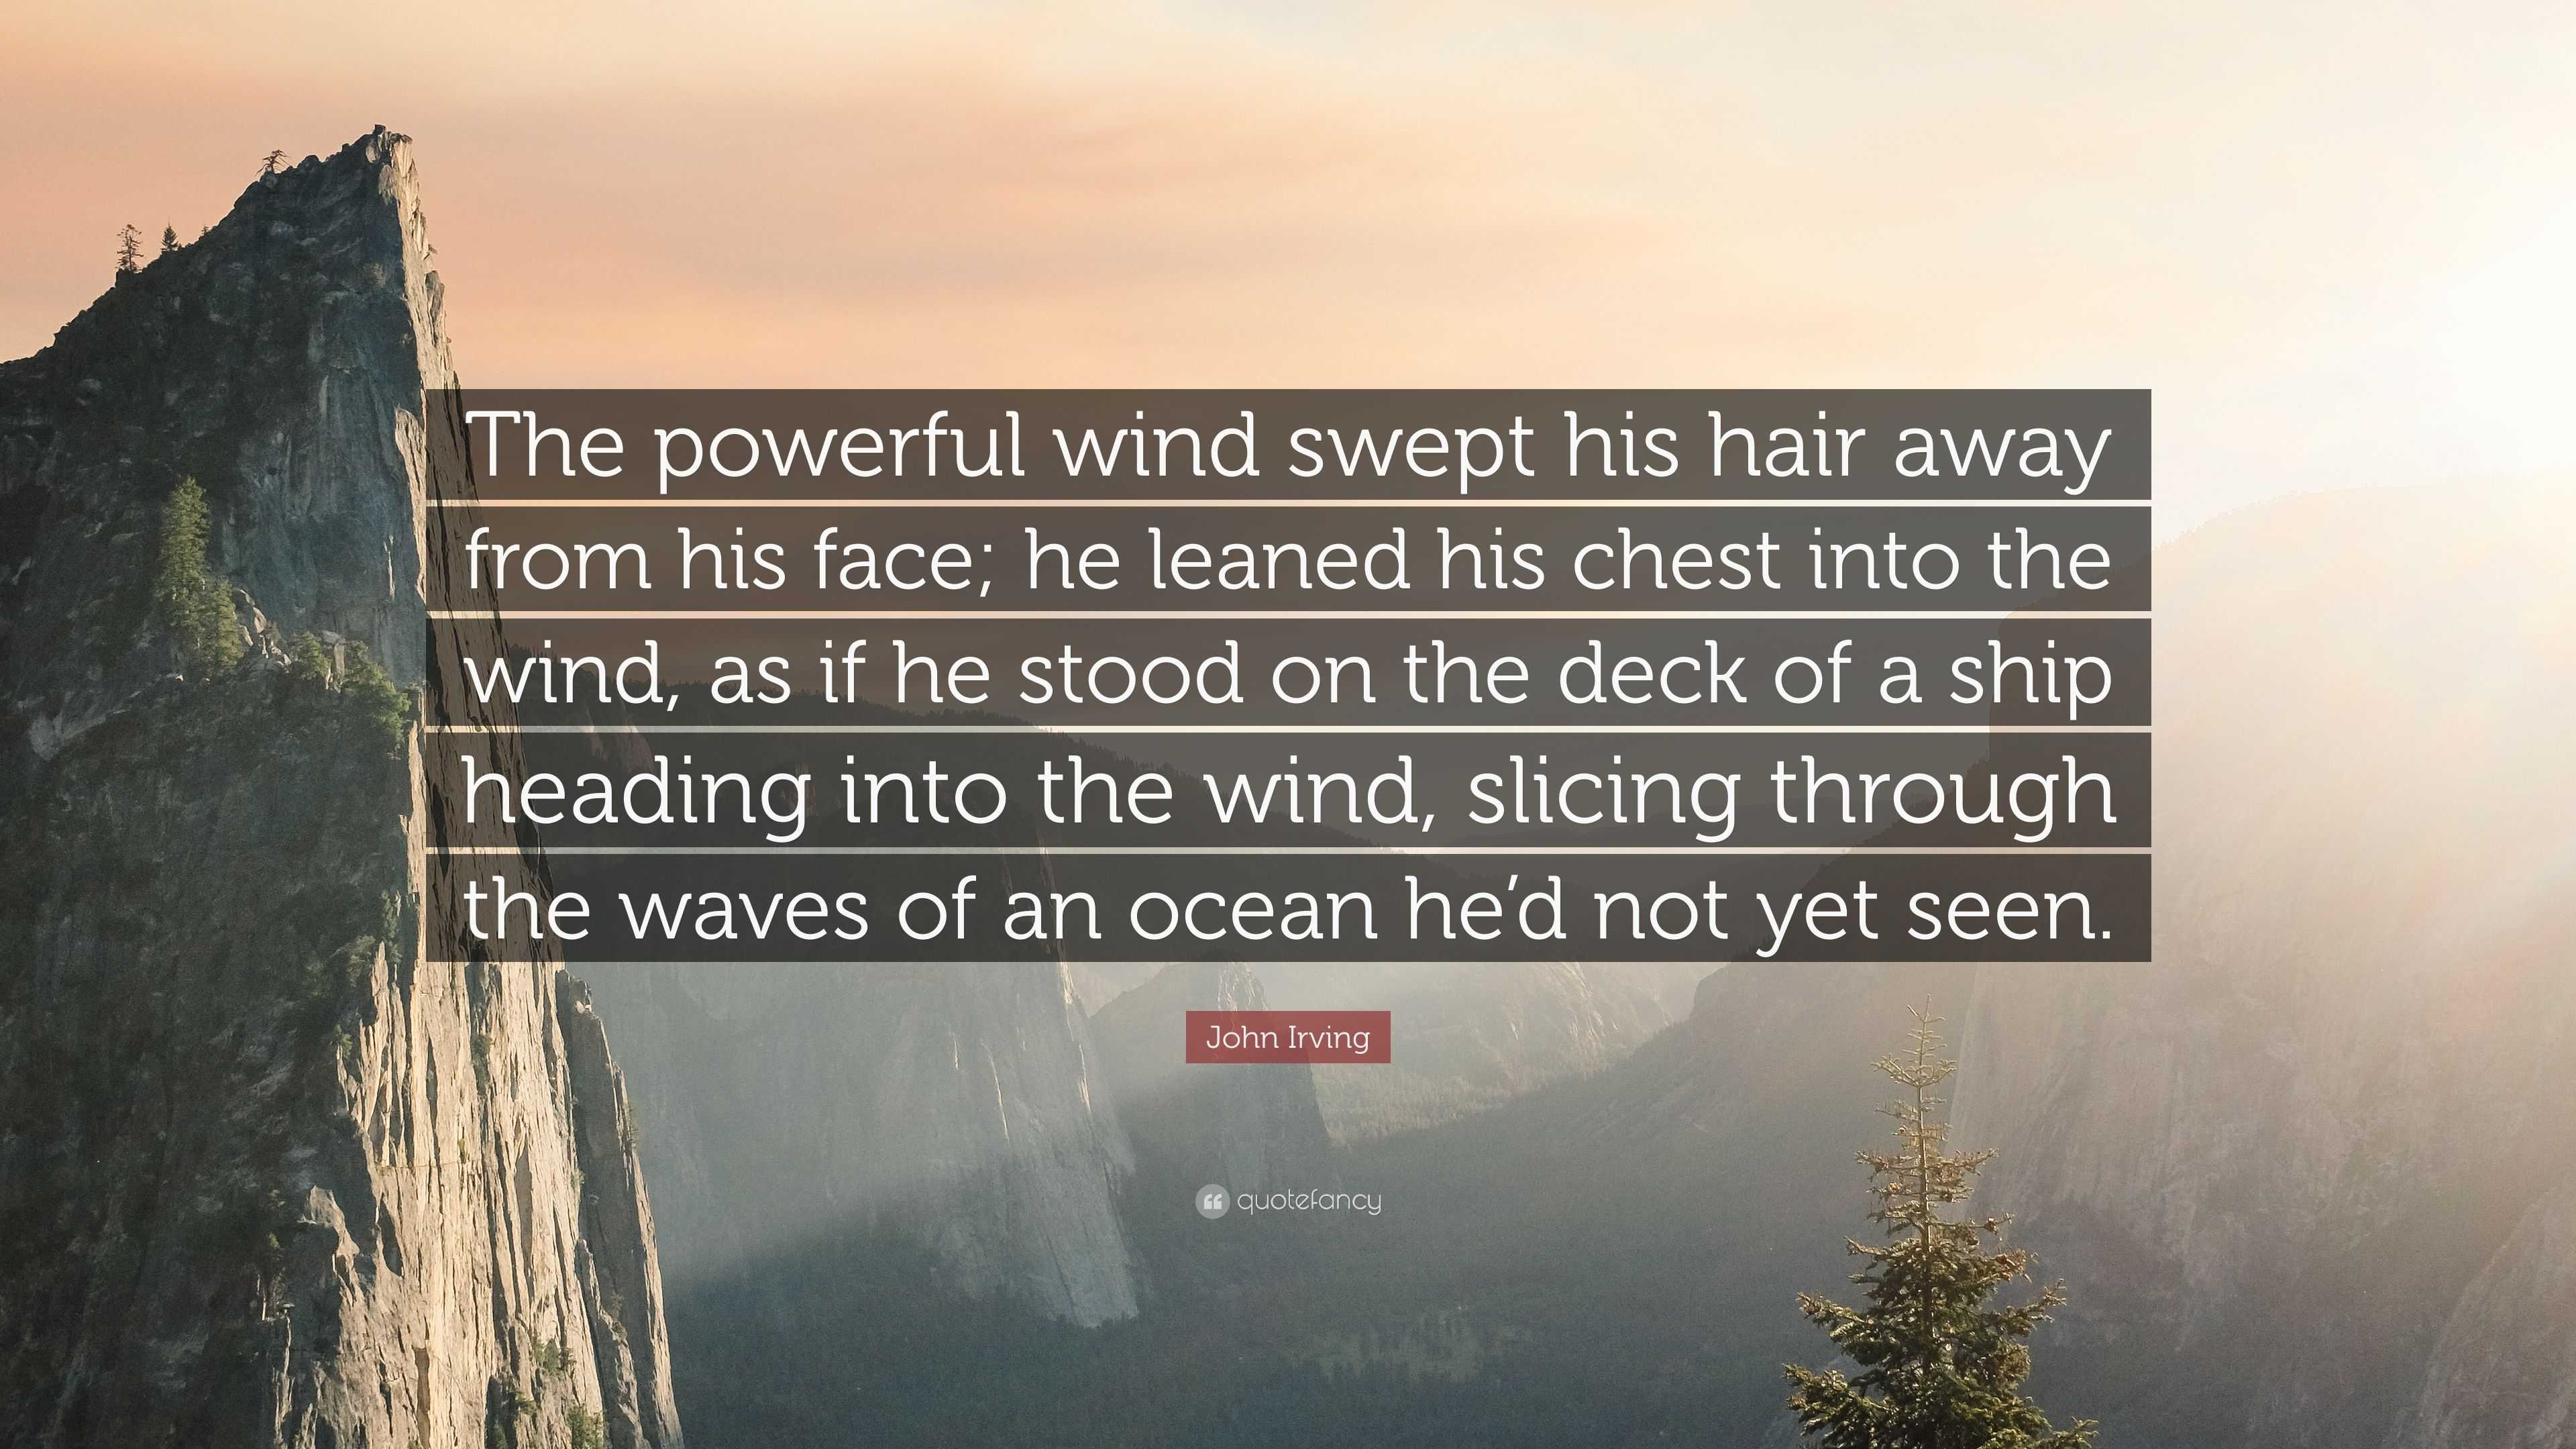 John Irving Quote: “The powerful wind swept his hair away from his face; he  leaned his chest into the wind, as if he stood on the deck of a ...”